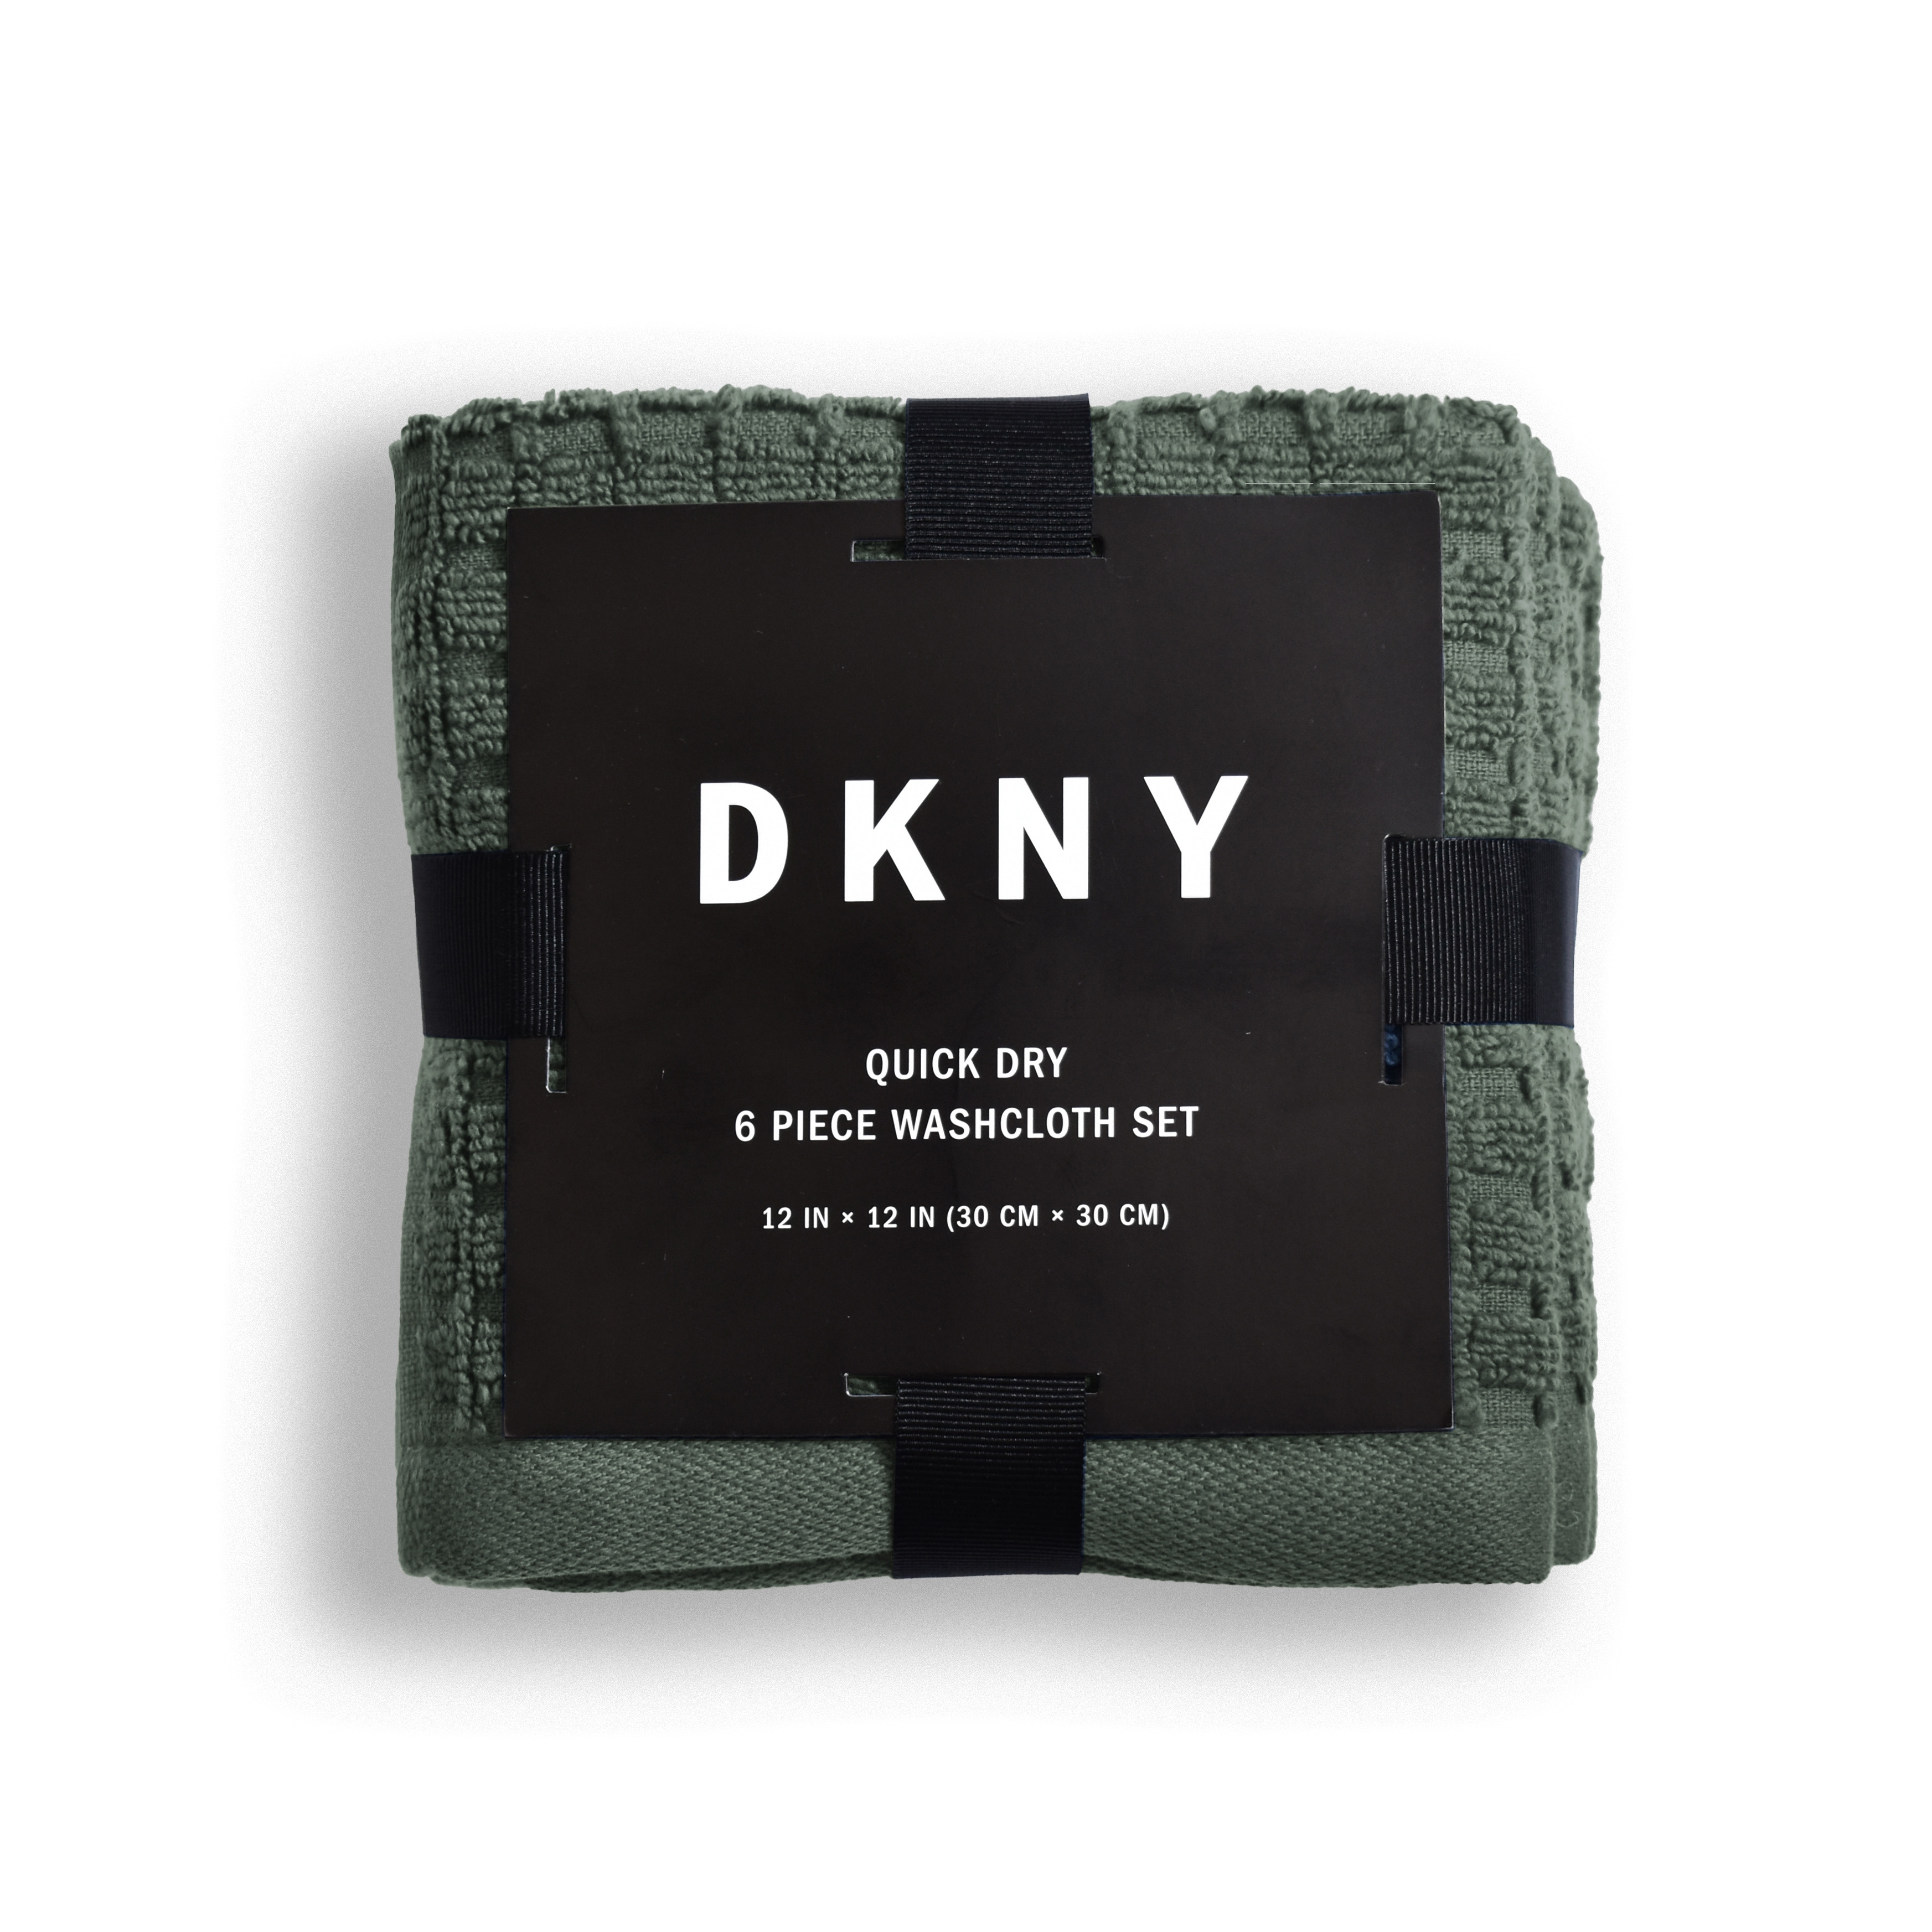 DKNY Quick Dry 6-pc Wash Cloth Set - Towel Multipack - Bed Bath & Beyond -  39152270